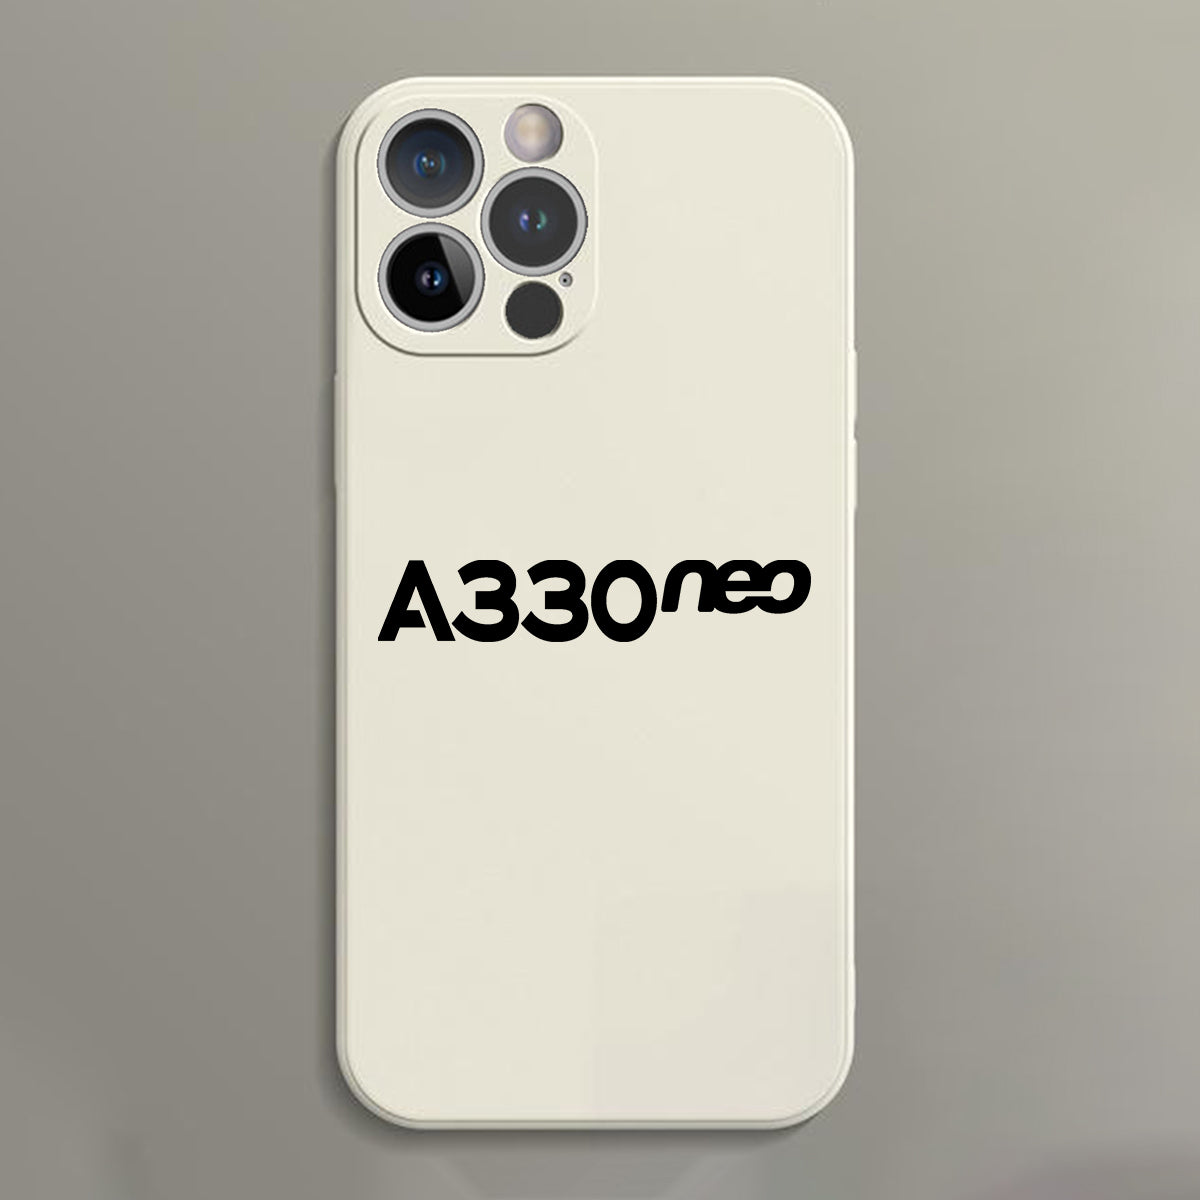 A330neo & Text Designed Soft Silicone iPhone Cases